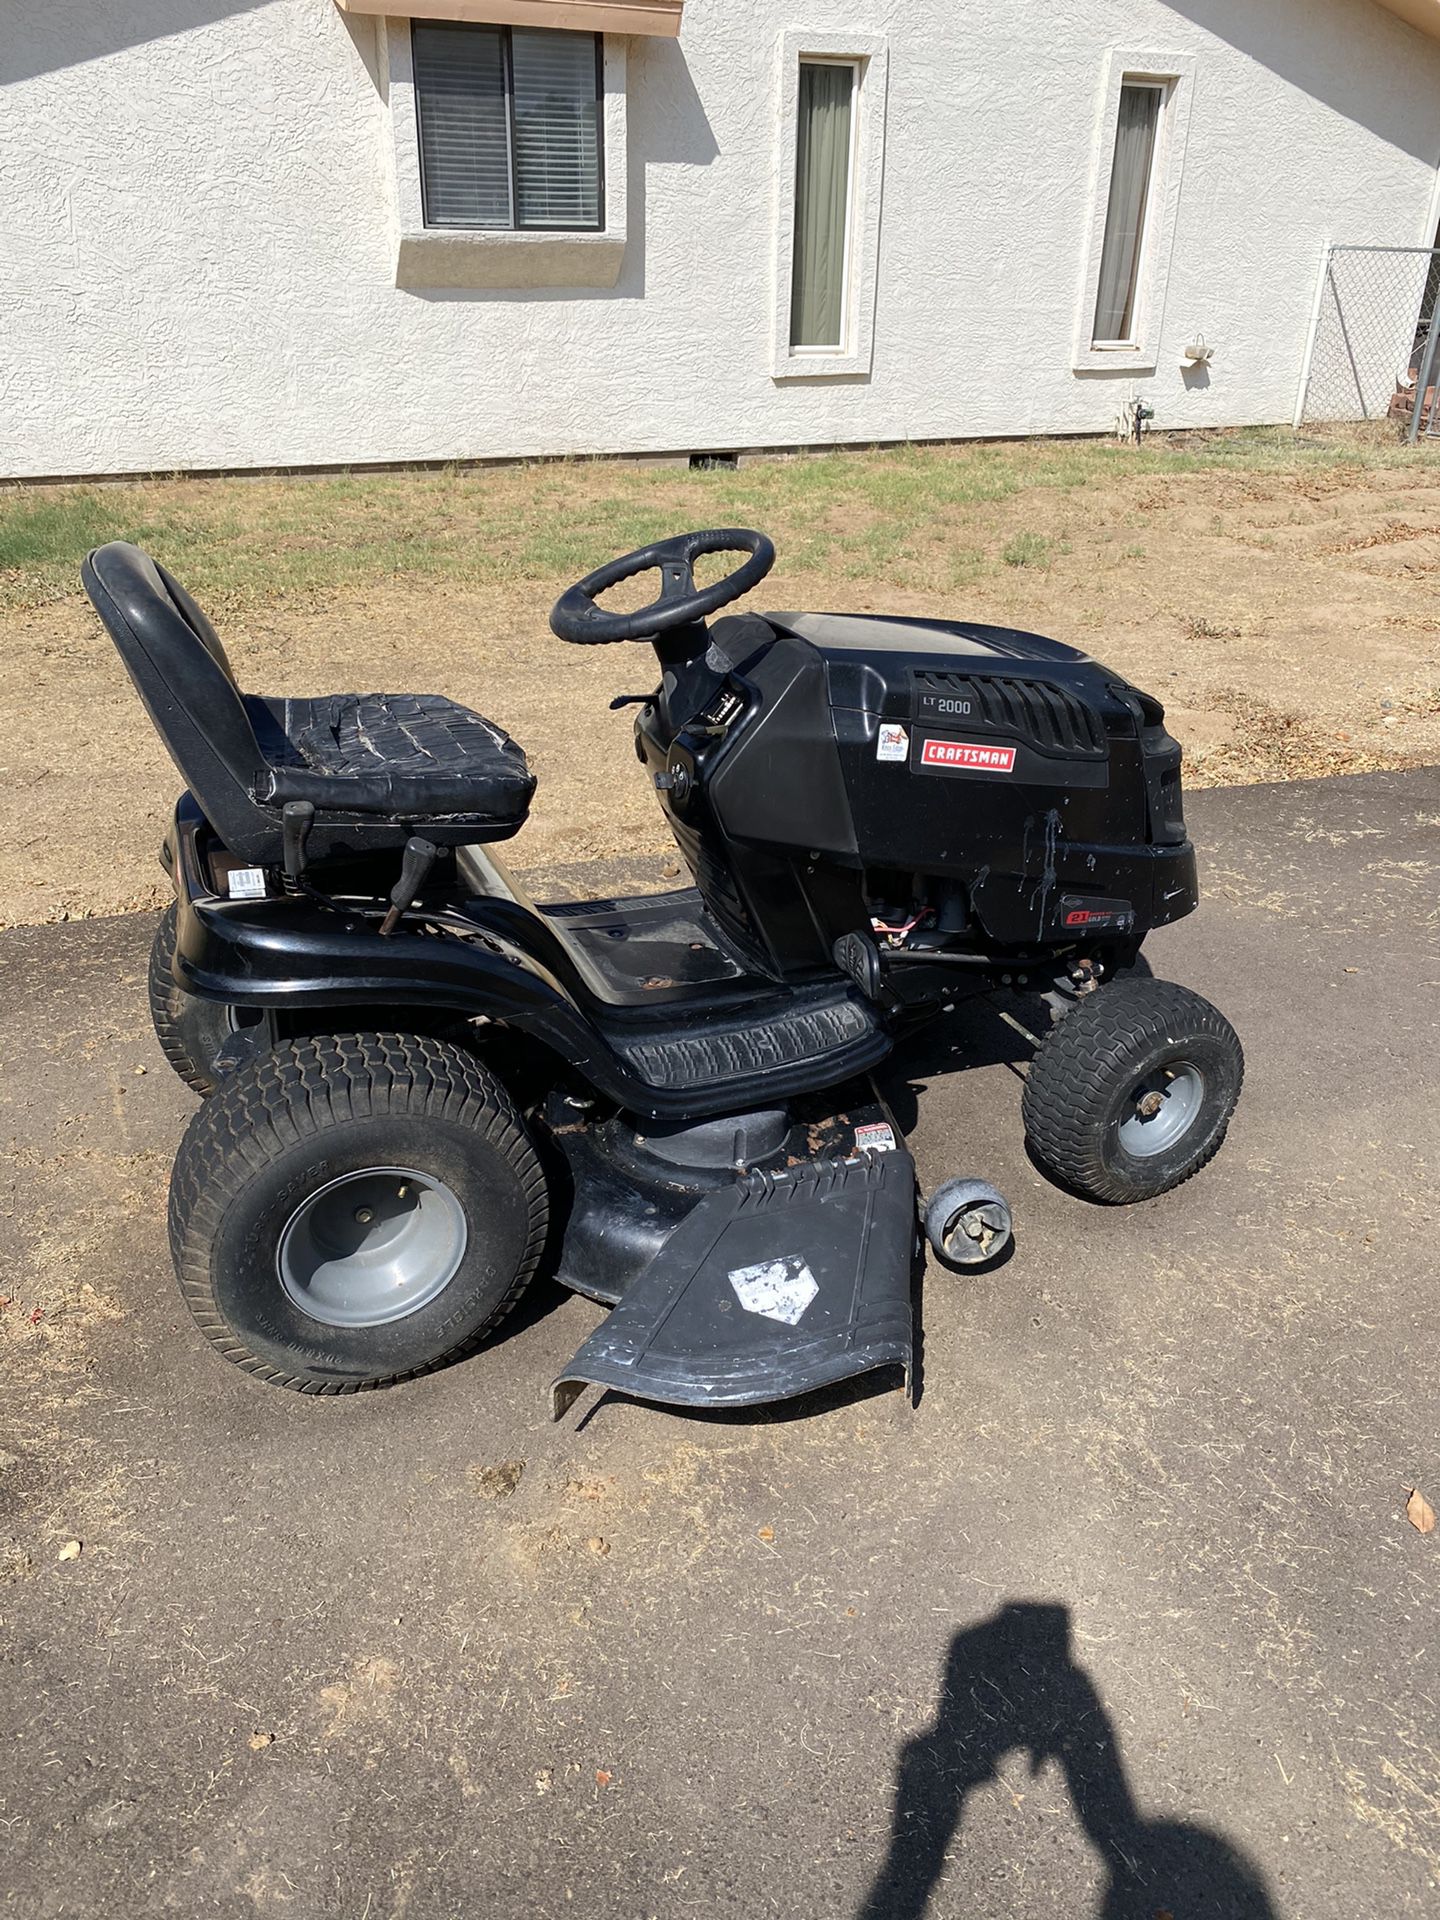 Craftsman riding lawnmower model LT 2000 21 horse power briggs and Stratton motor, all new belts all new blades new starter brand new battery brand n